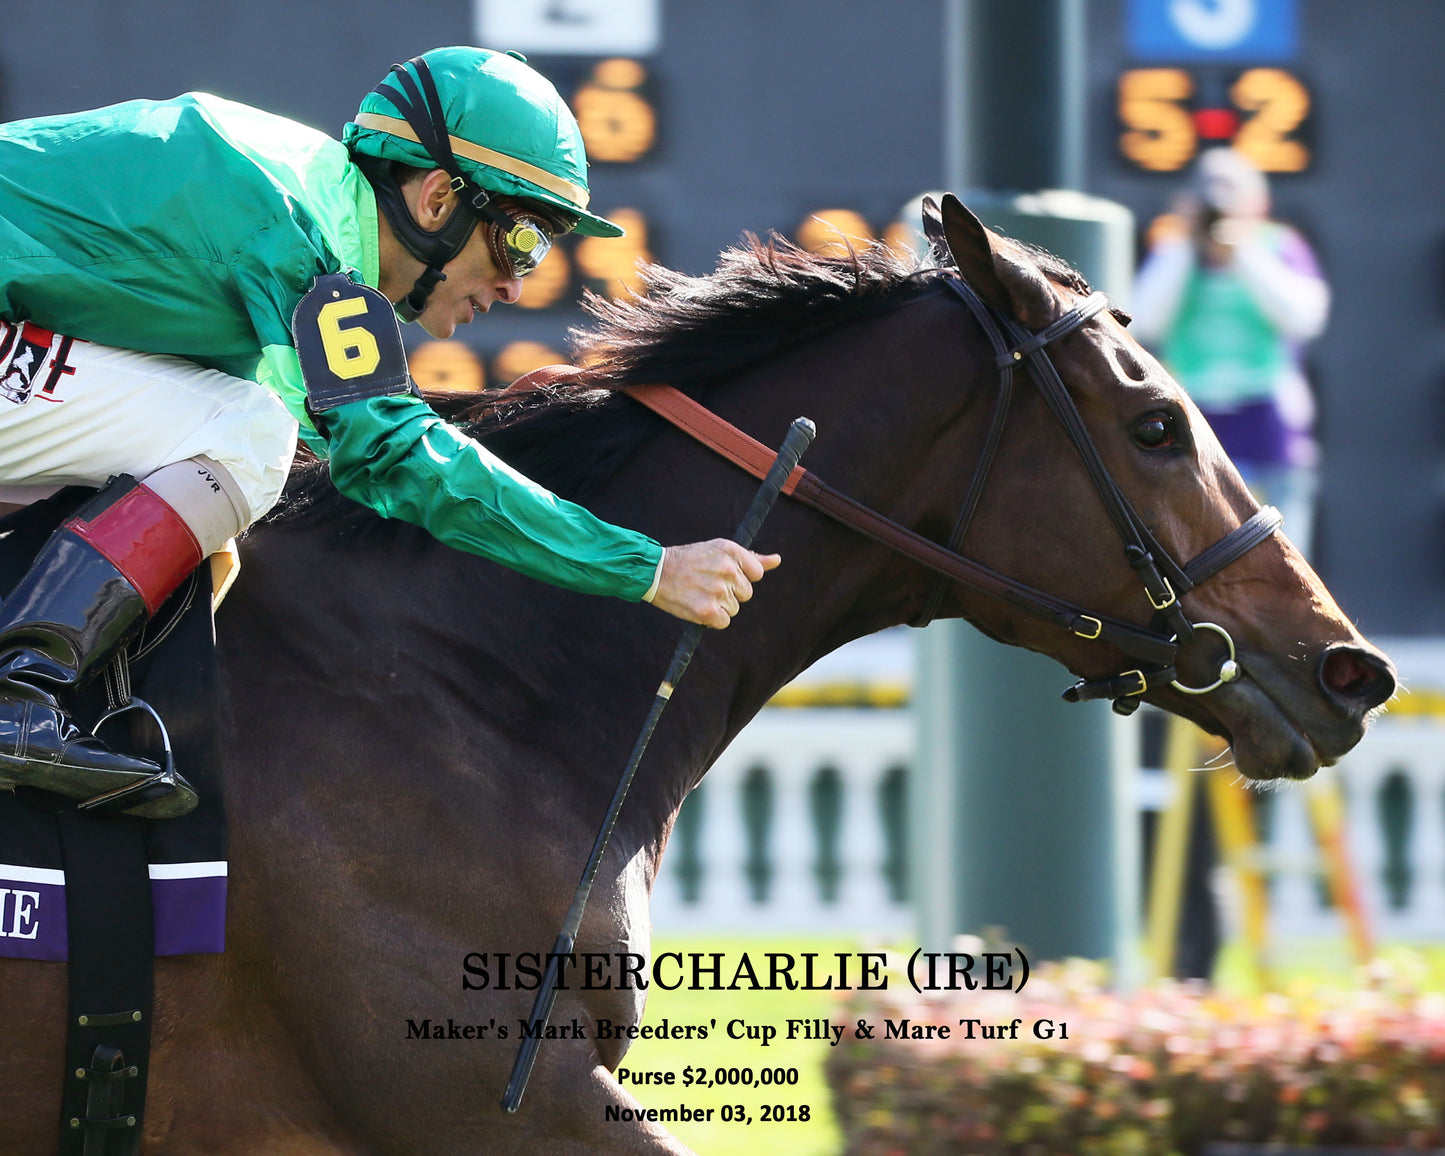 SISTERCHARLIE (IRE) - Maker's Mark Breeders' Cup Filly & Mare Turf G1 - 11-03-18 - R06 - CD - Finish 03 W Ident